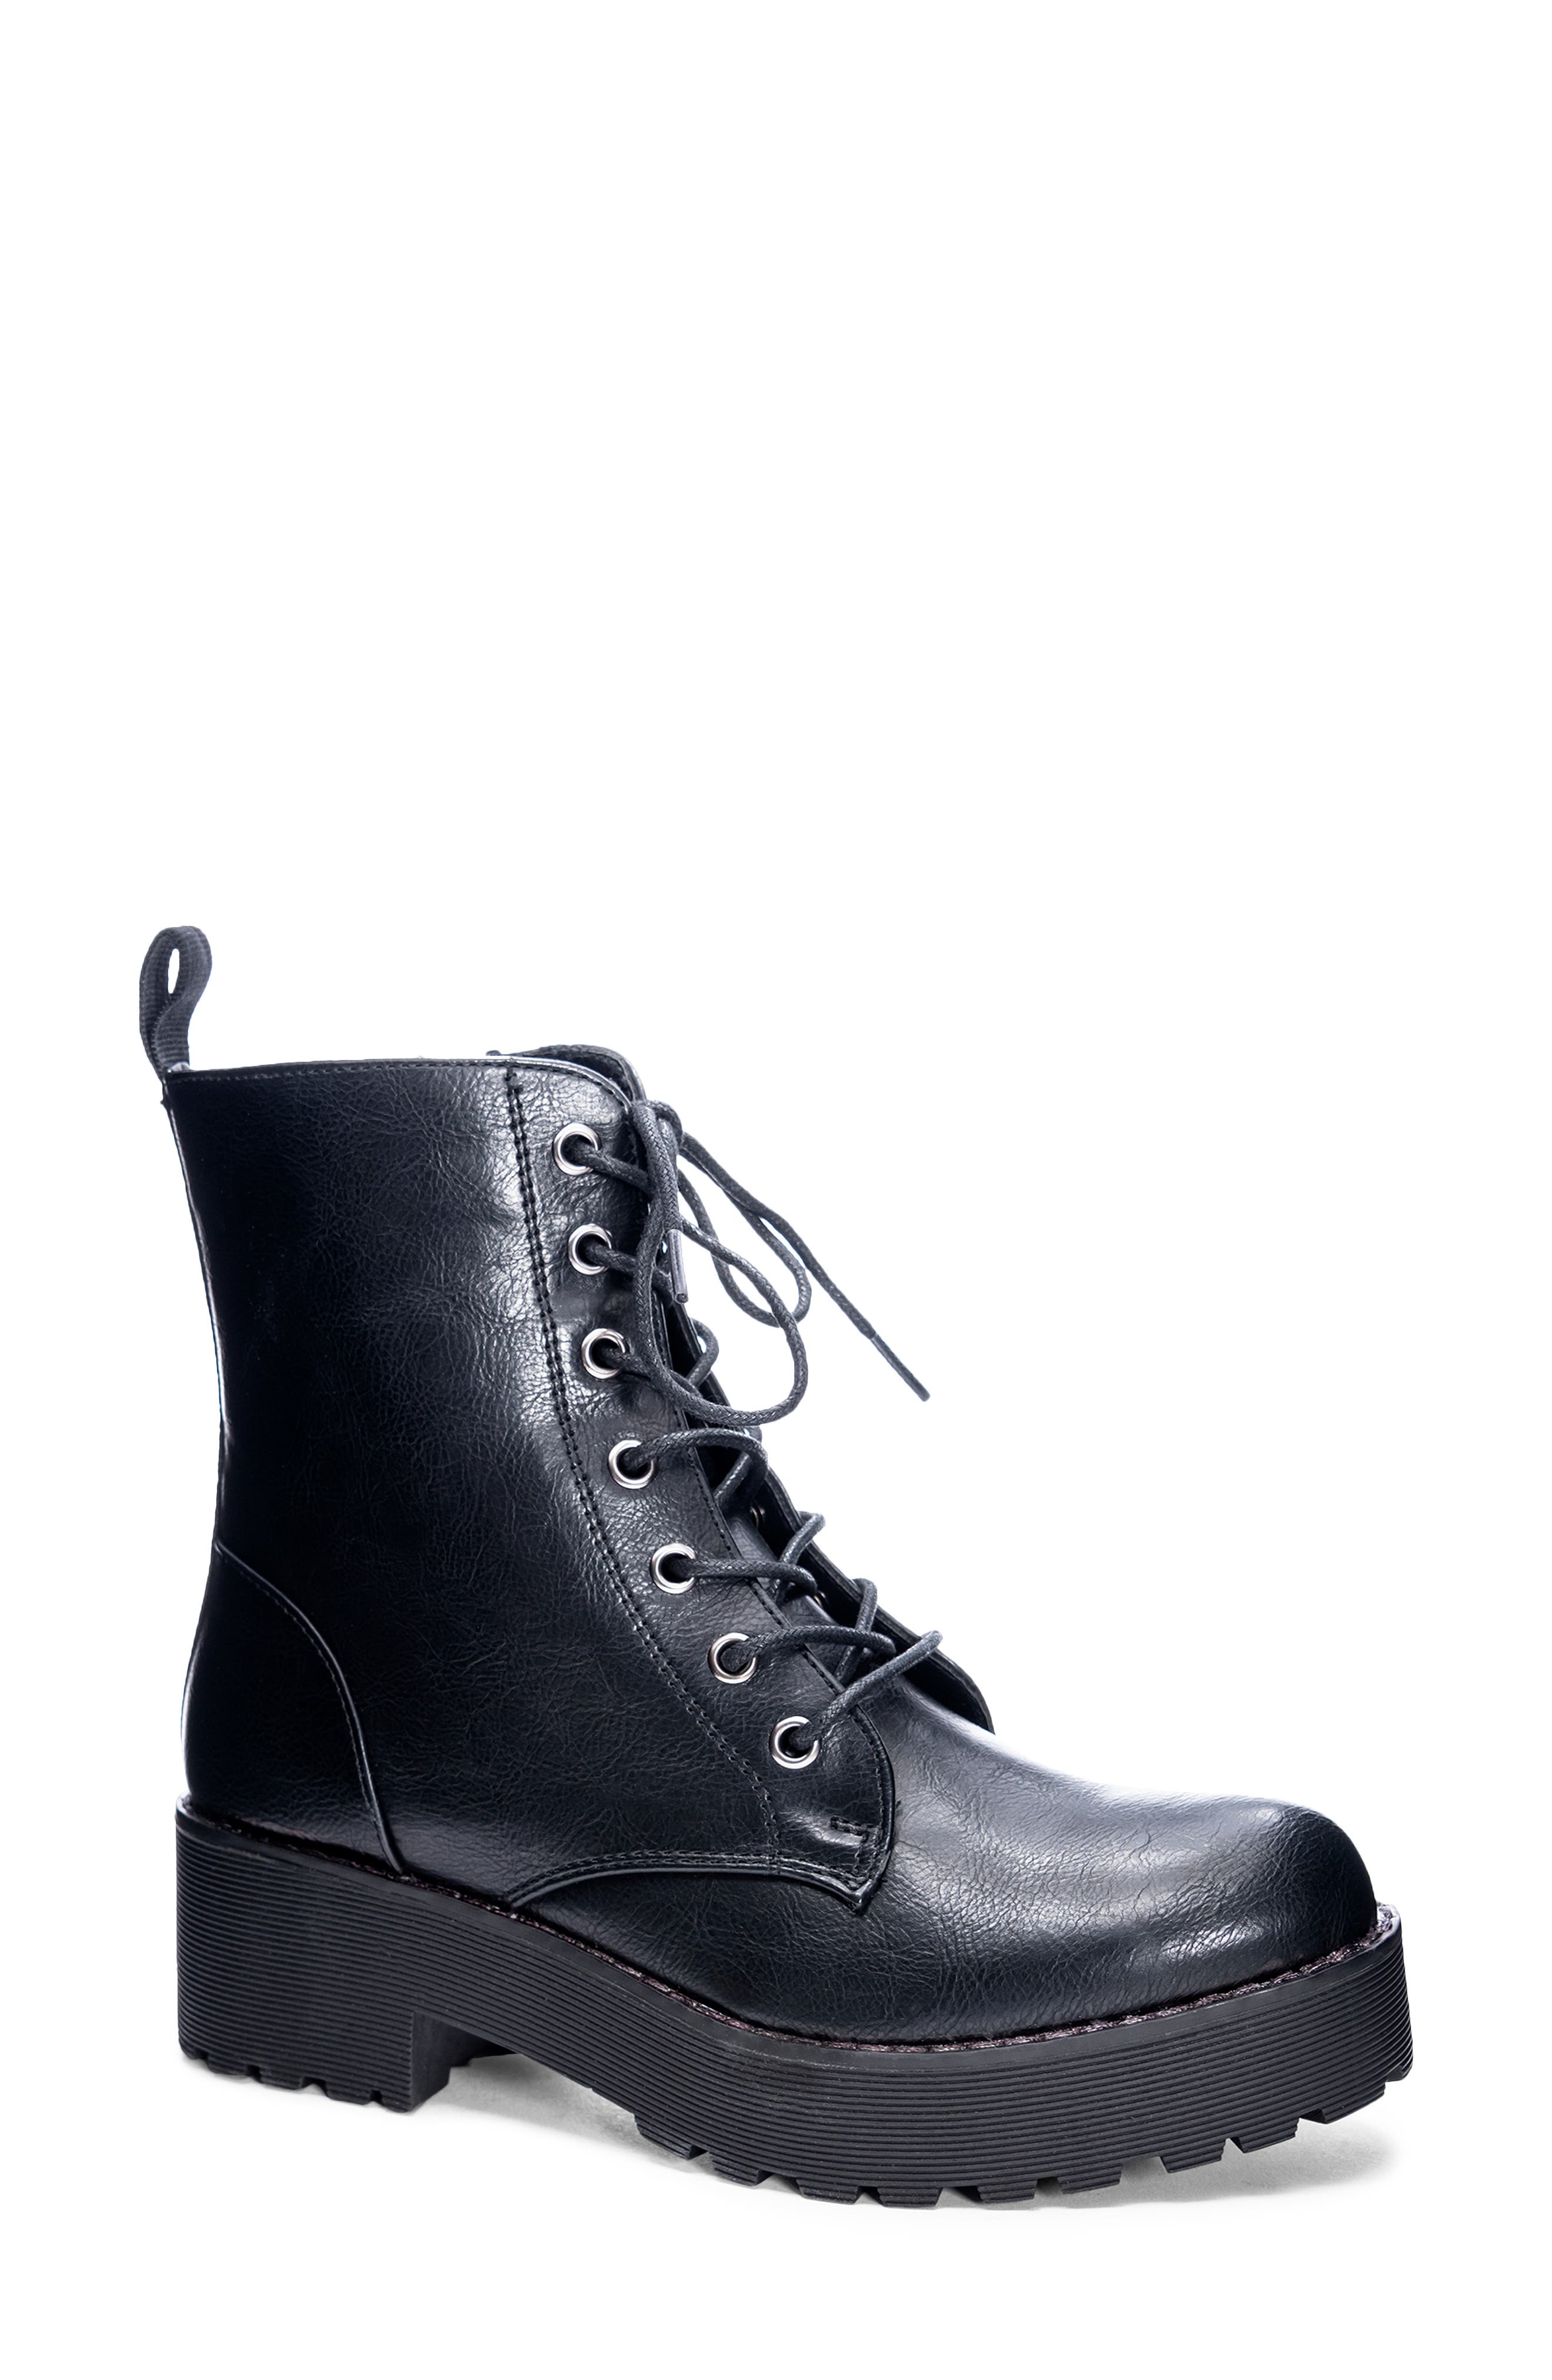 vandal boots clearance